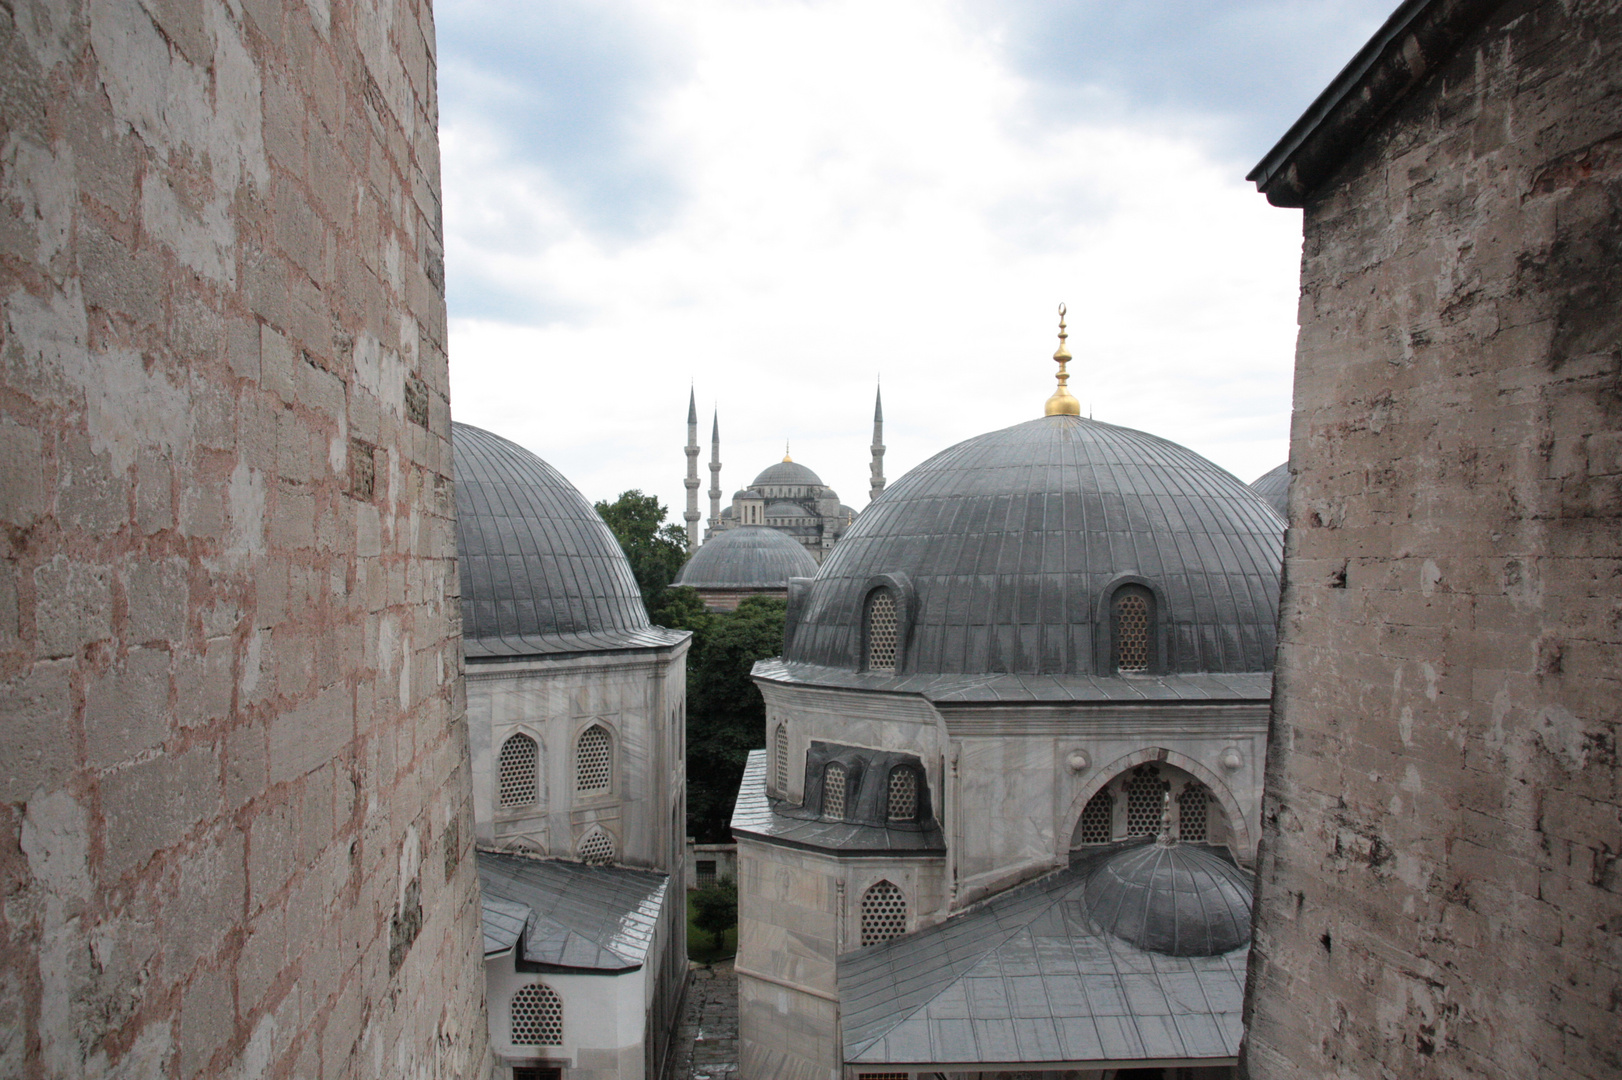 From Hagia Sophia to the Blue mosque, Istanbul